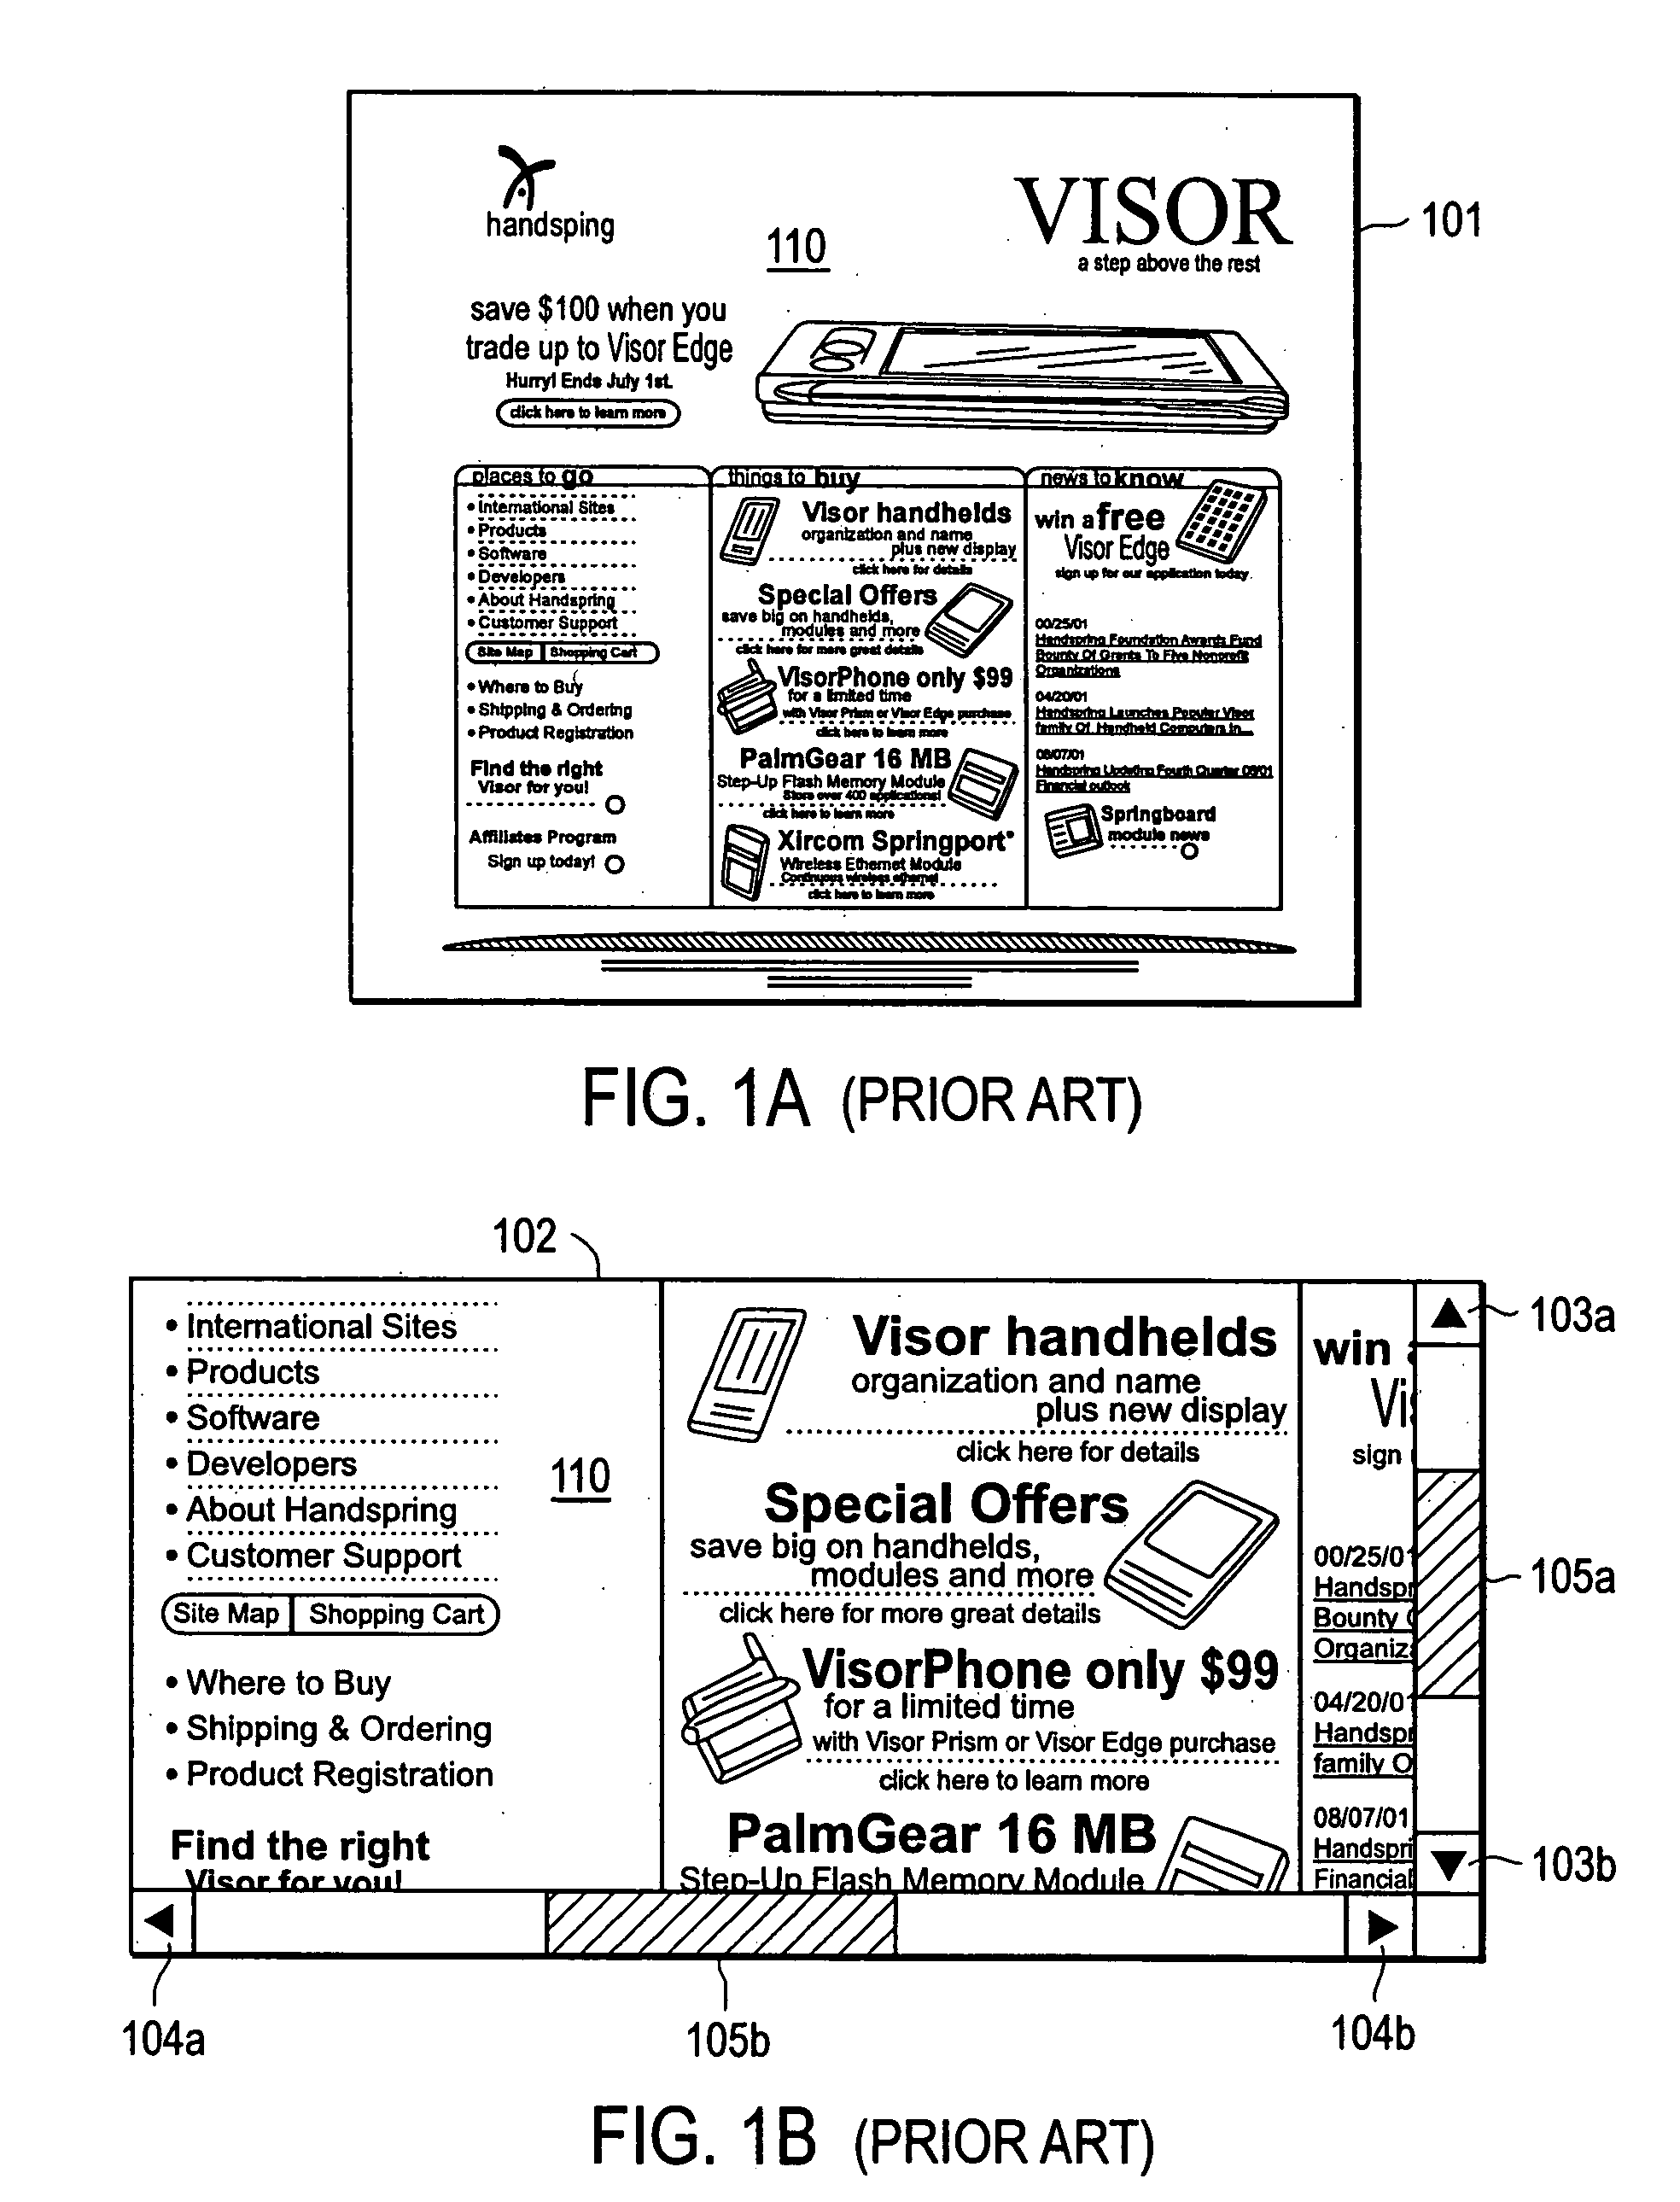 Translating tabular data formatted for one display device to a format for display on other display devices